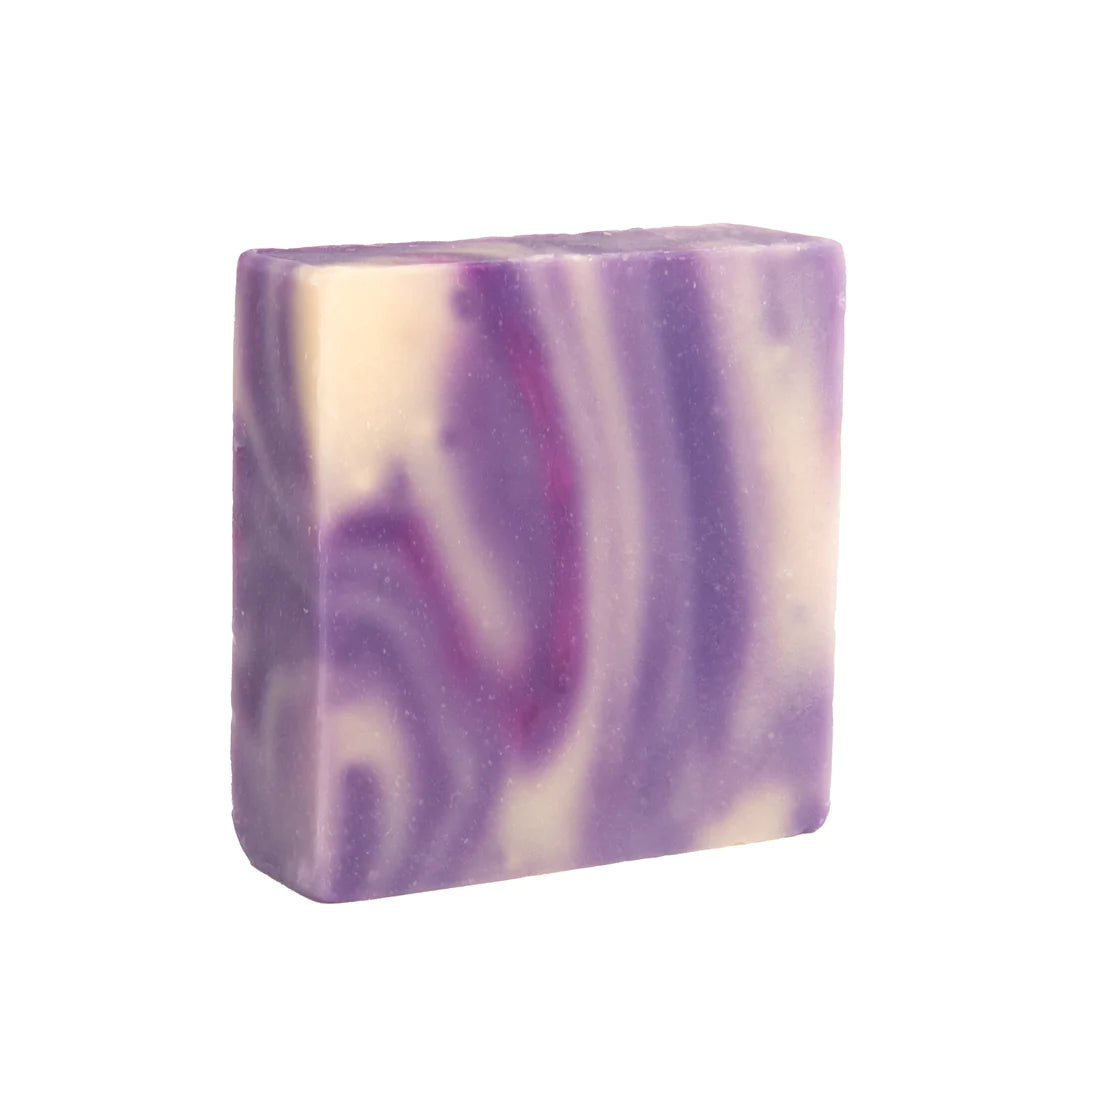 3.5 oz bar of lavender handcrafted Organic Shea Butter Soap